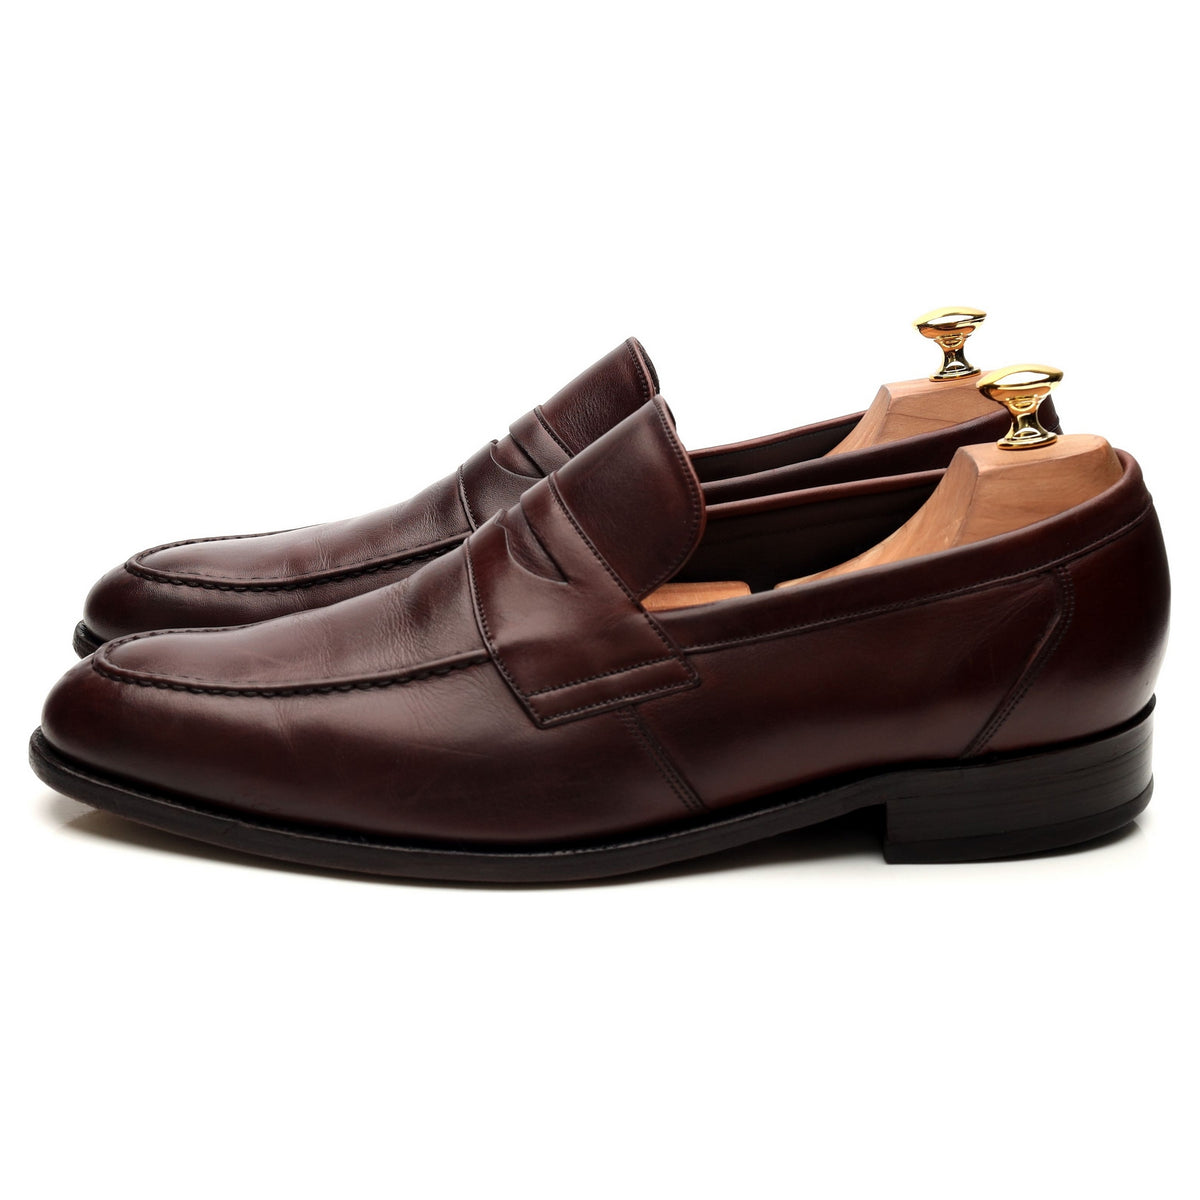 Burgundy Leather Loafers UK 10 F